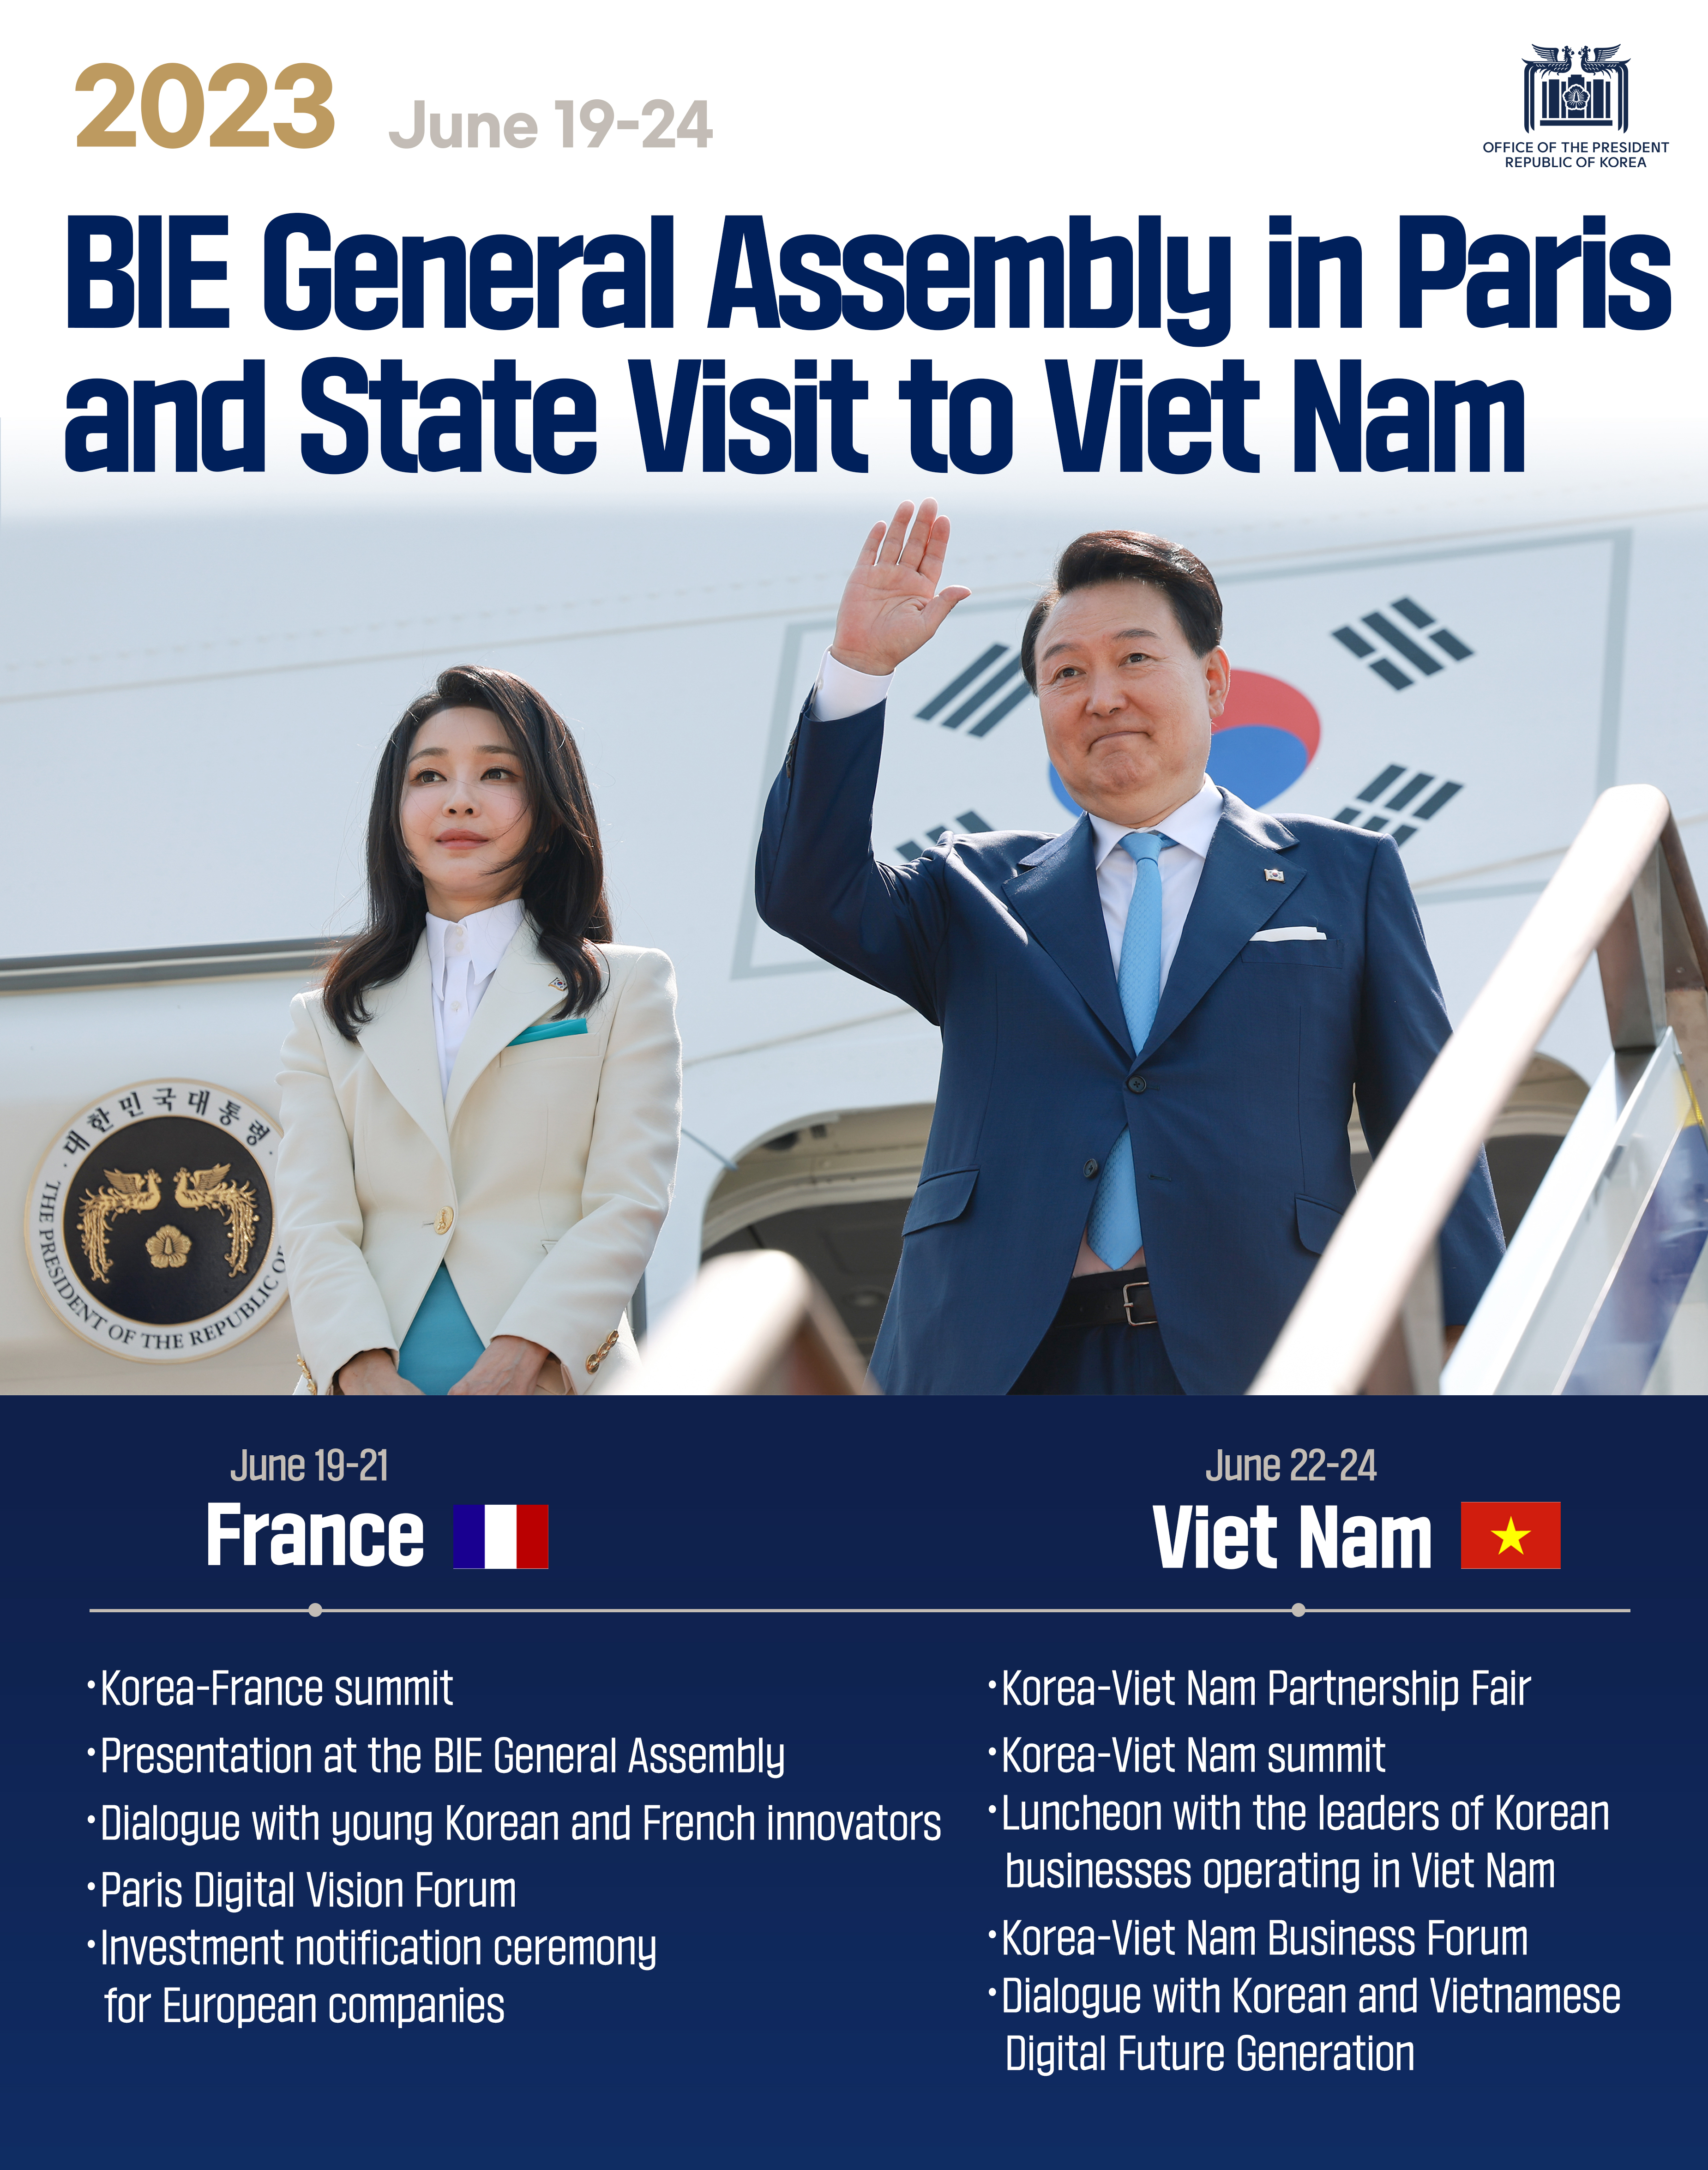 BIE General Assembly in Paris and State Visit to Viet Nam slide 1